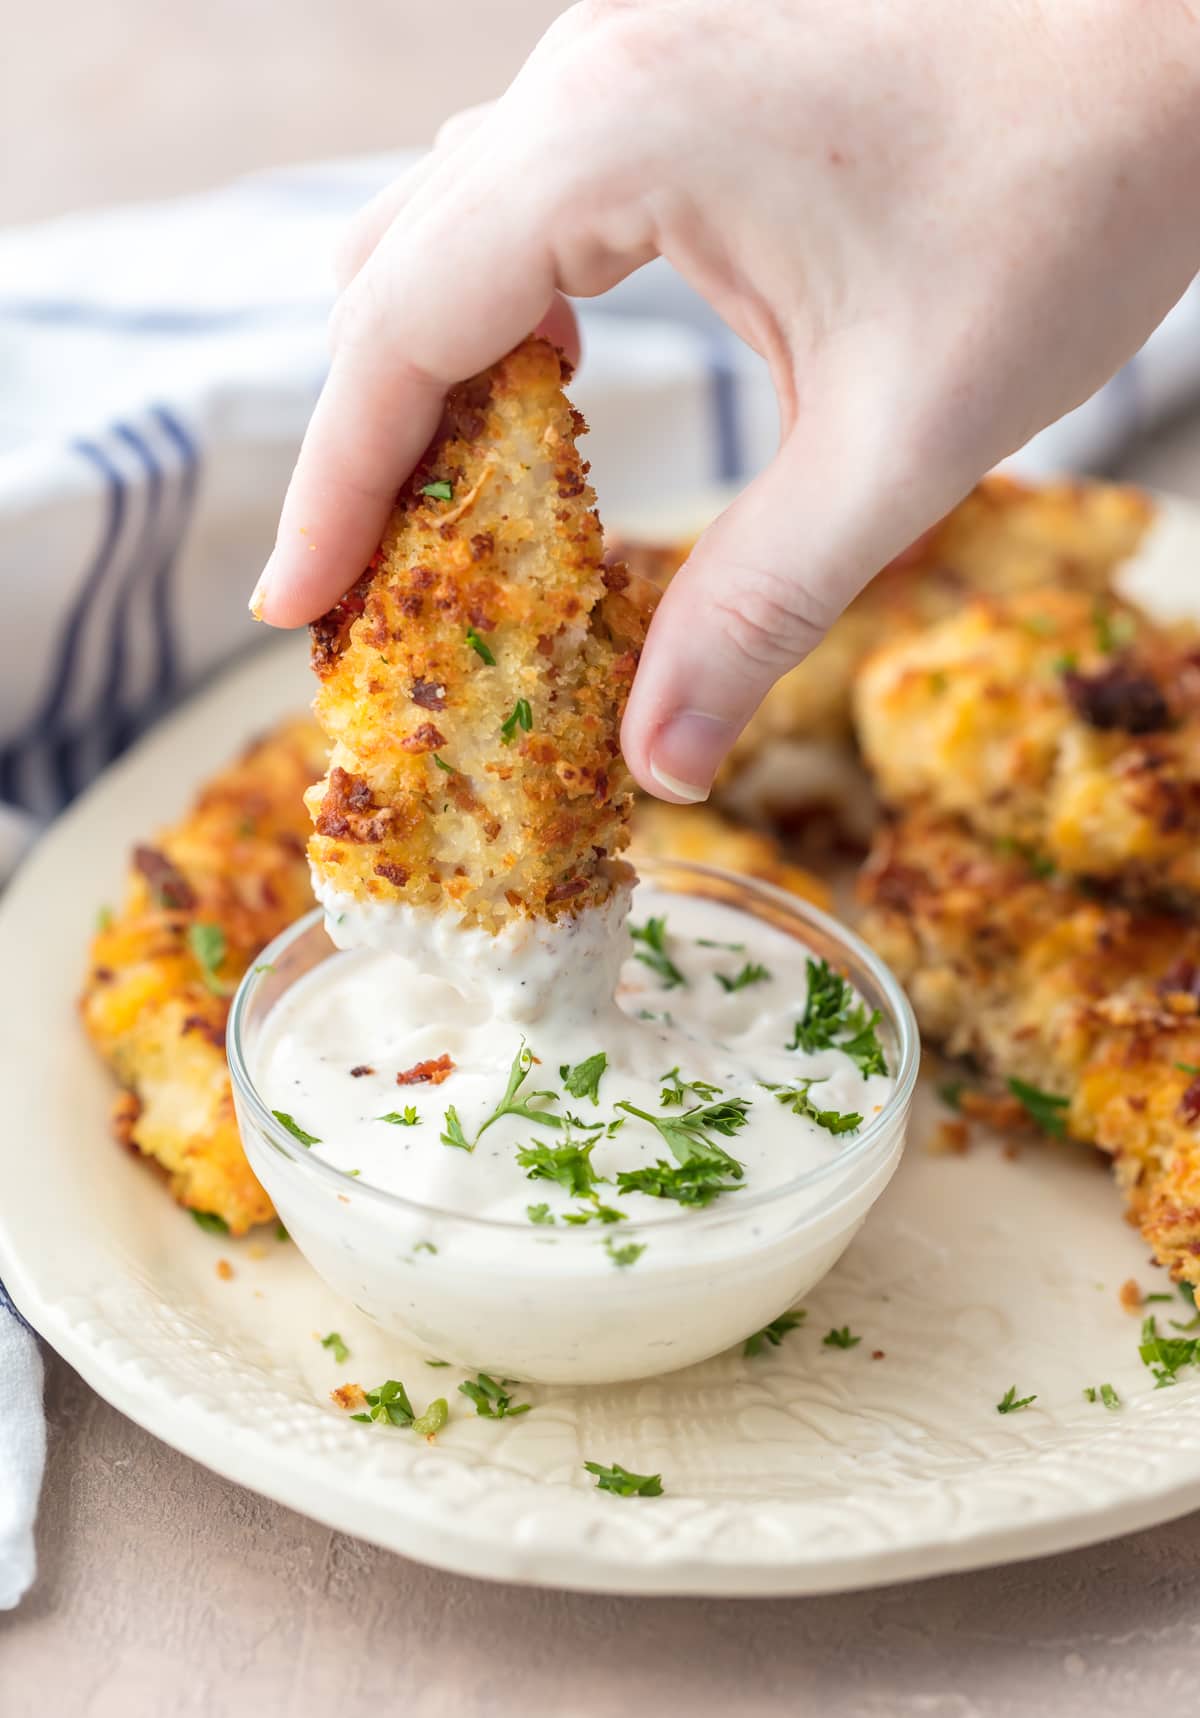 Dipping a baked chicken tender in ranch